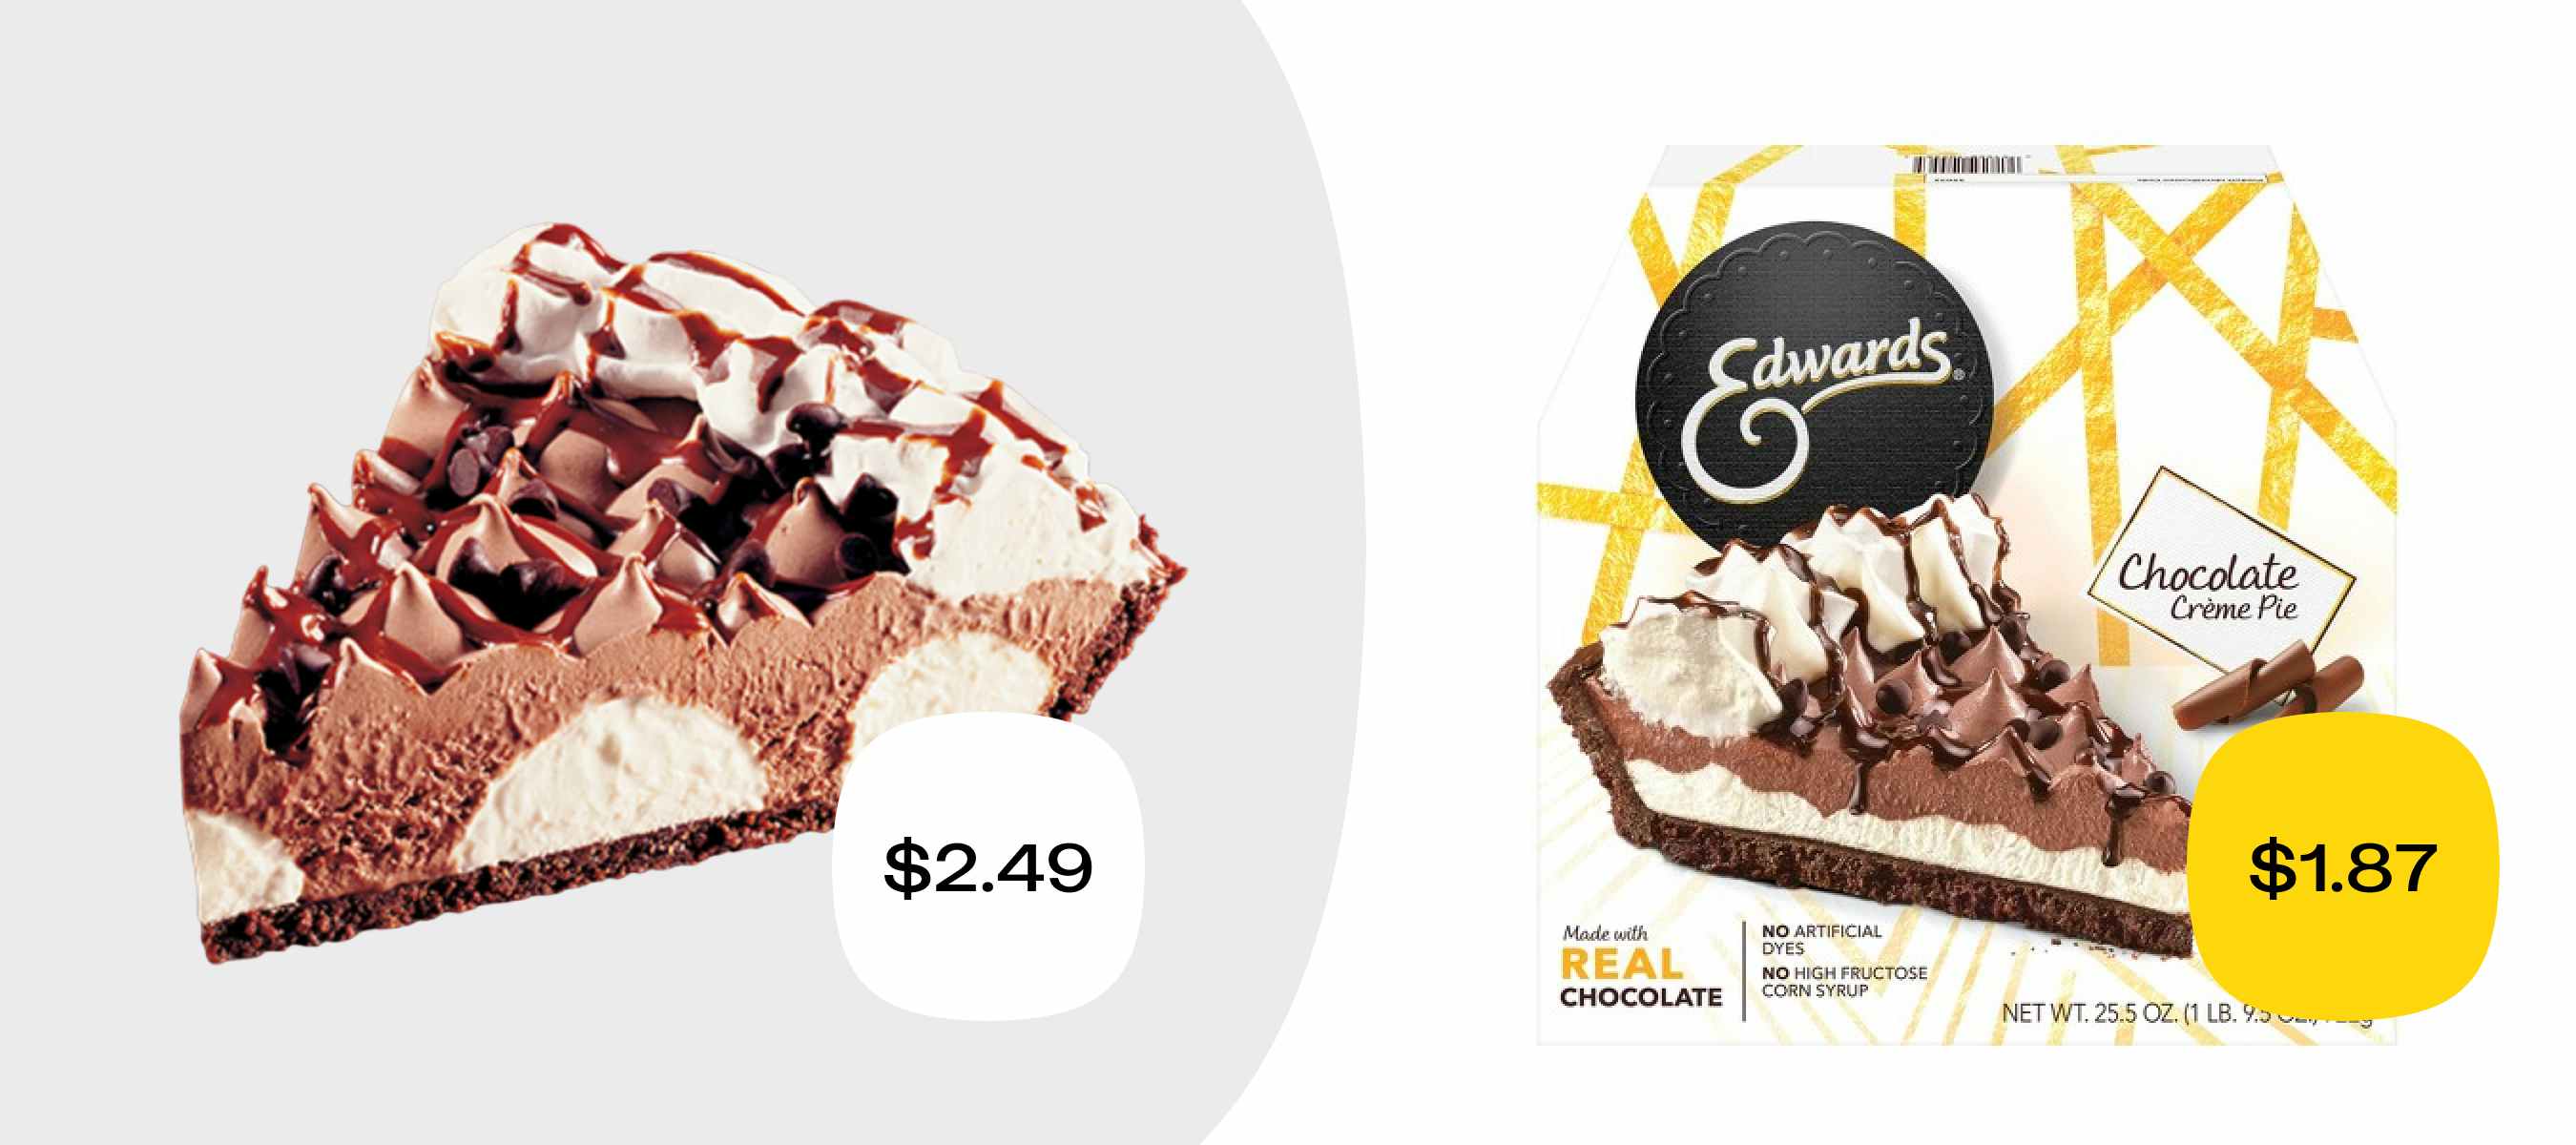 burger king's hershey pie for $2.49 versus an edwards pie for $1.87